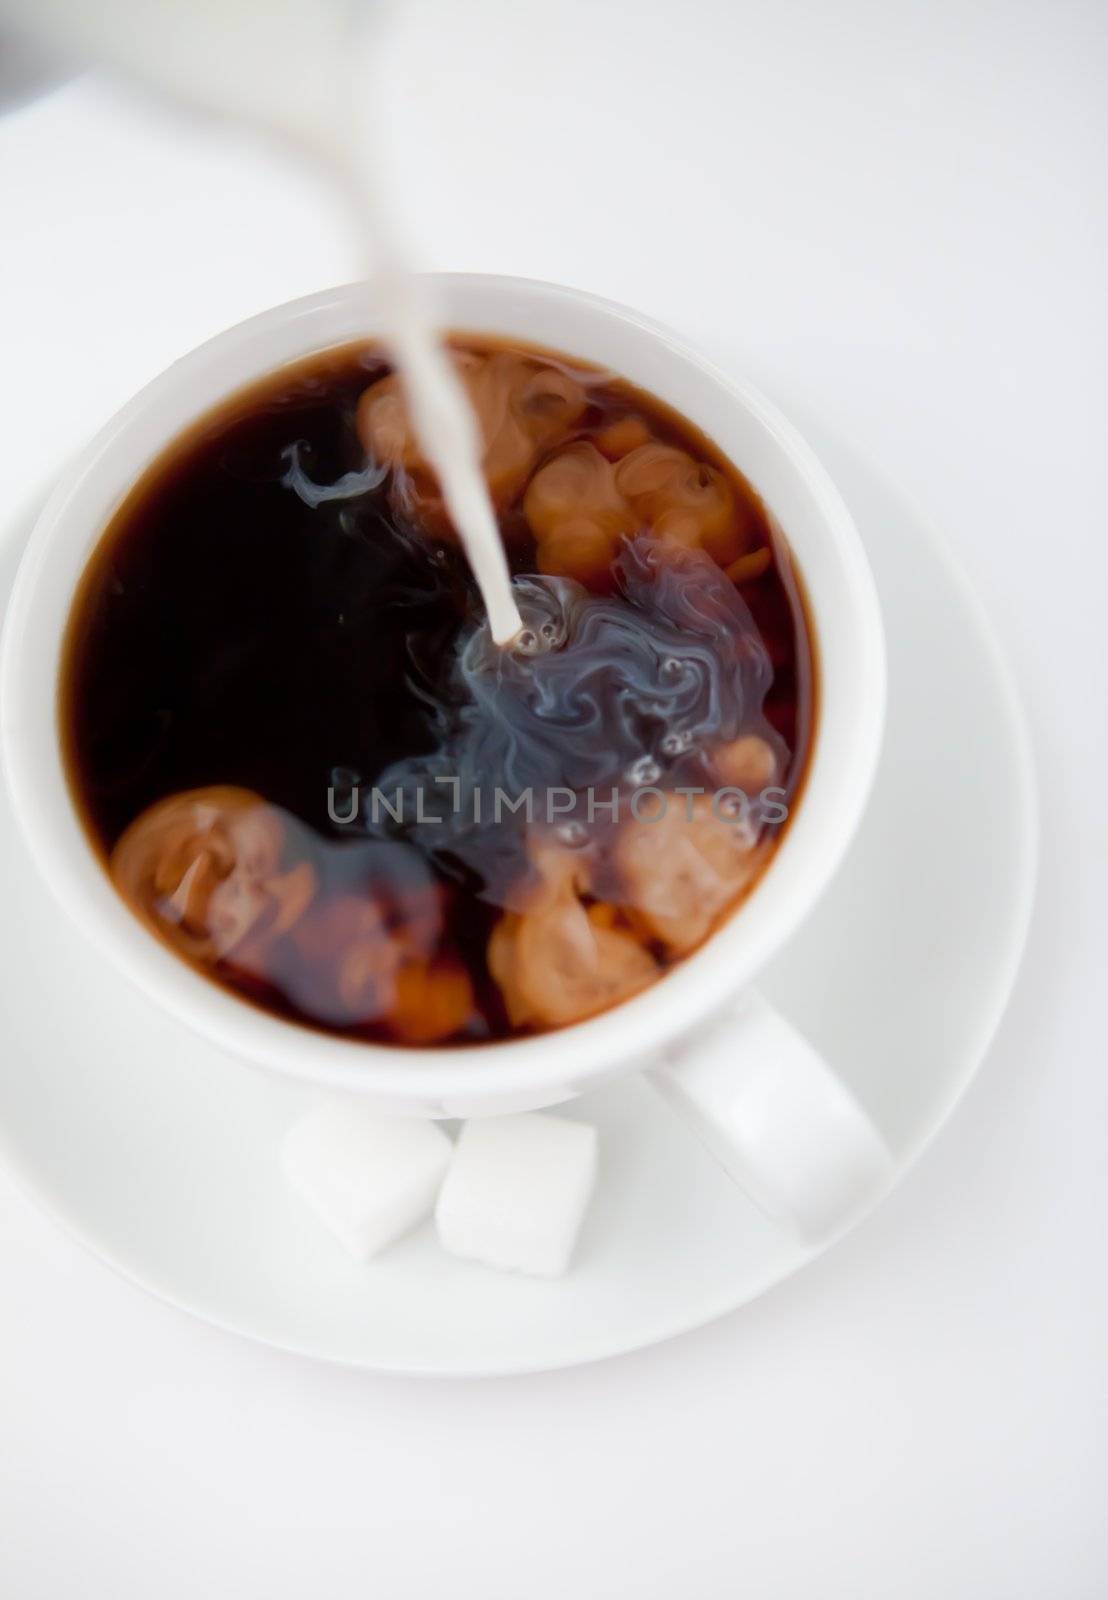 Milk and coffee against a white background